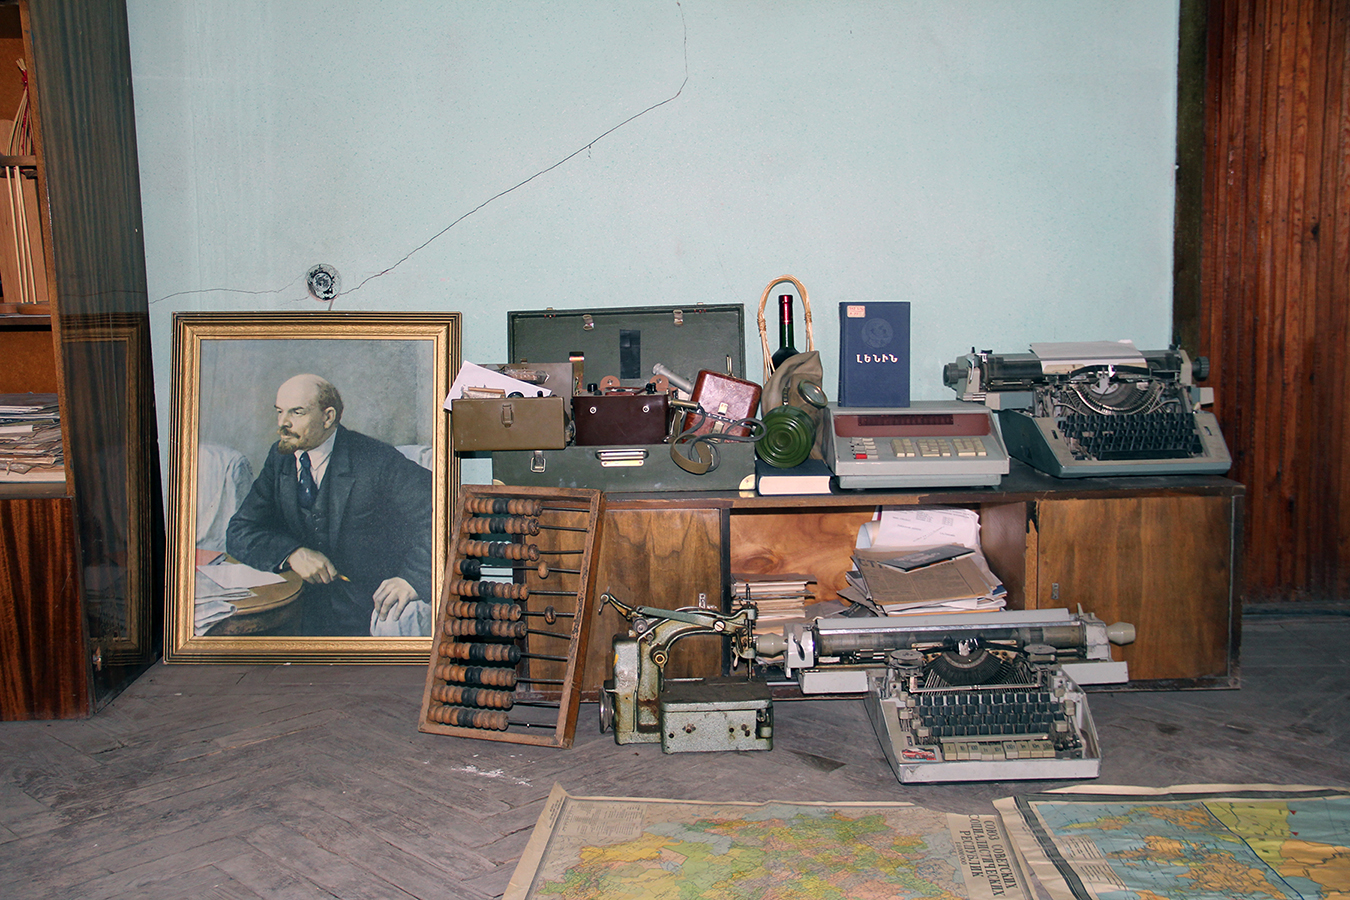 Display of Soviet artifacts in the director’s office of the Yeghegnadzor Knitting Factory. Photo by Lori Khatchadourian.